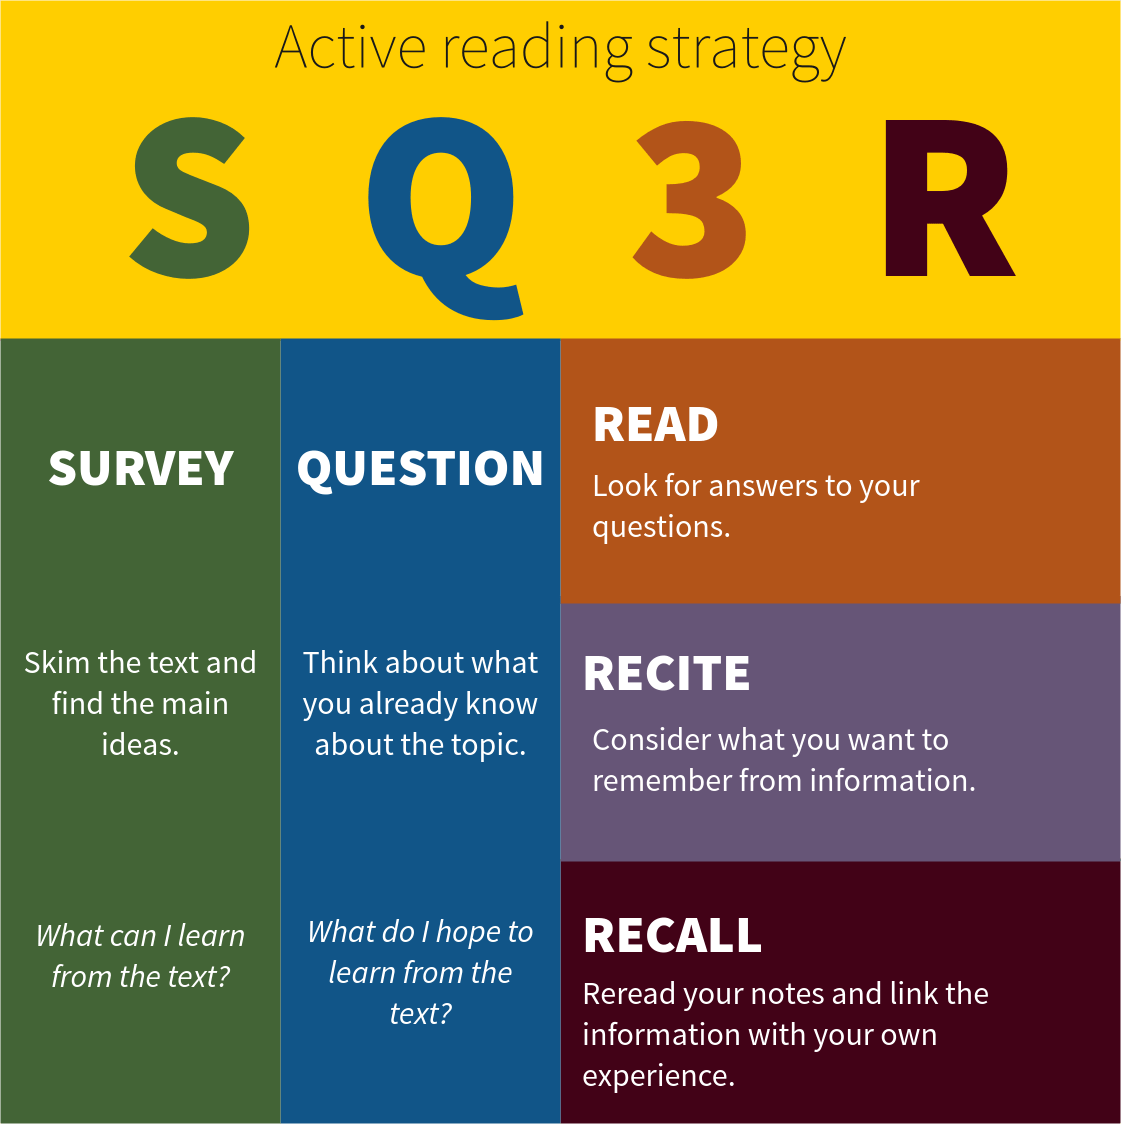 sqr3 is a method used to